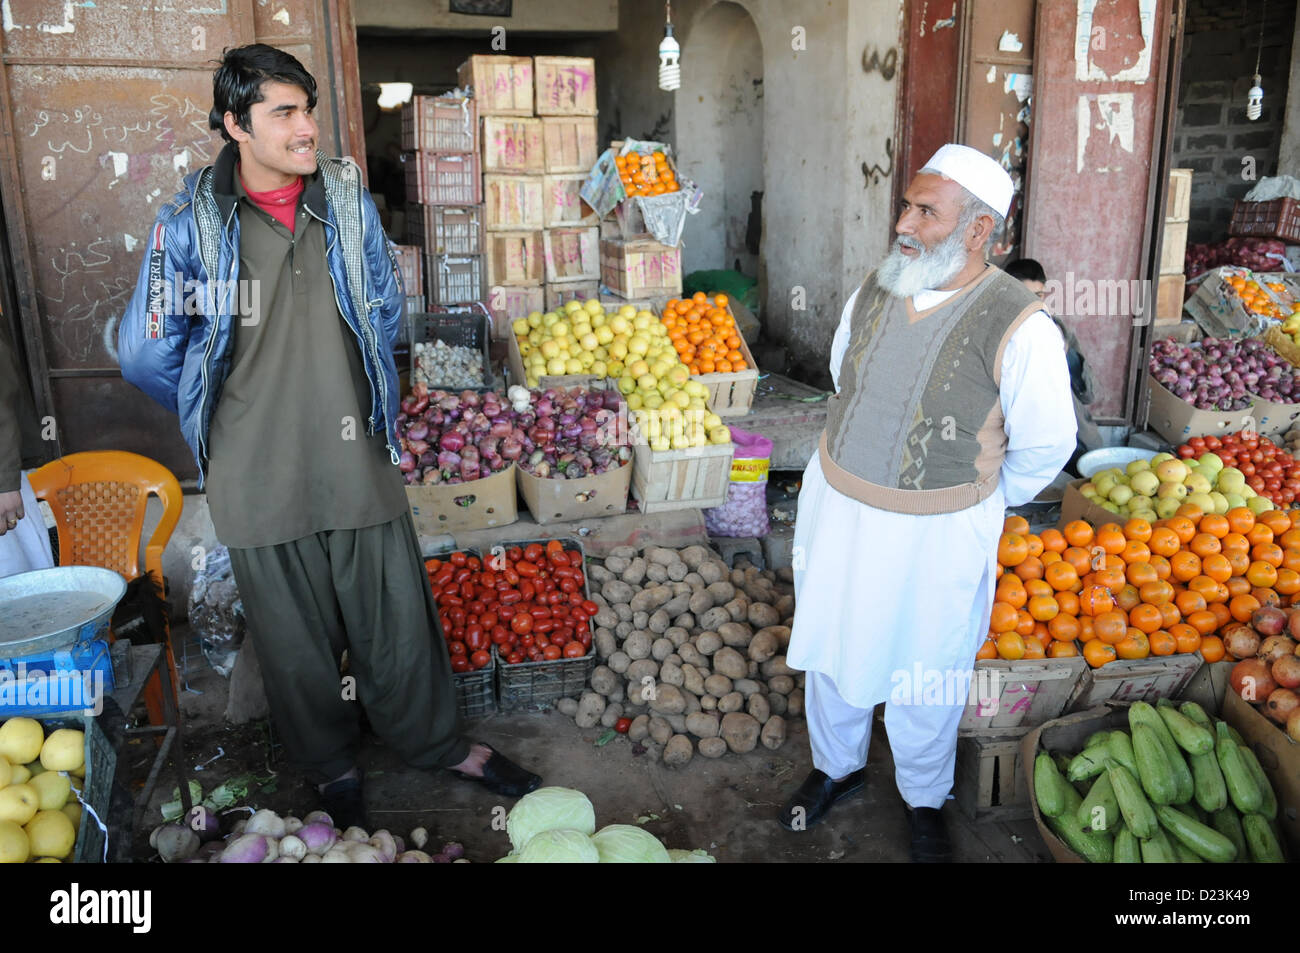 A produce shop owner, right, and his employee share a conversation in Farah City, Jan. 13.  Provincial Reconstruction Team (PRT) Farah liaisons visited a nearby bank to discuss small business development and growth initiatives in Farah.  PRT Farah's mission is to train, advise, and assist Afghan government leaders at the municipal, district, and provincial levels in Farah province Afghanistan.  Their civil military team is comprised of members of the U.S. Navy, U.S. Army, the U.S. Department of State and the U.S. Agency for International Development (USAID).  (U.S. Navy photo by Lt. j.g. Matth Stock Photo